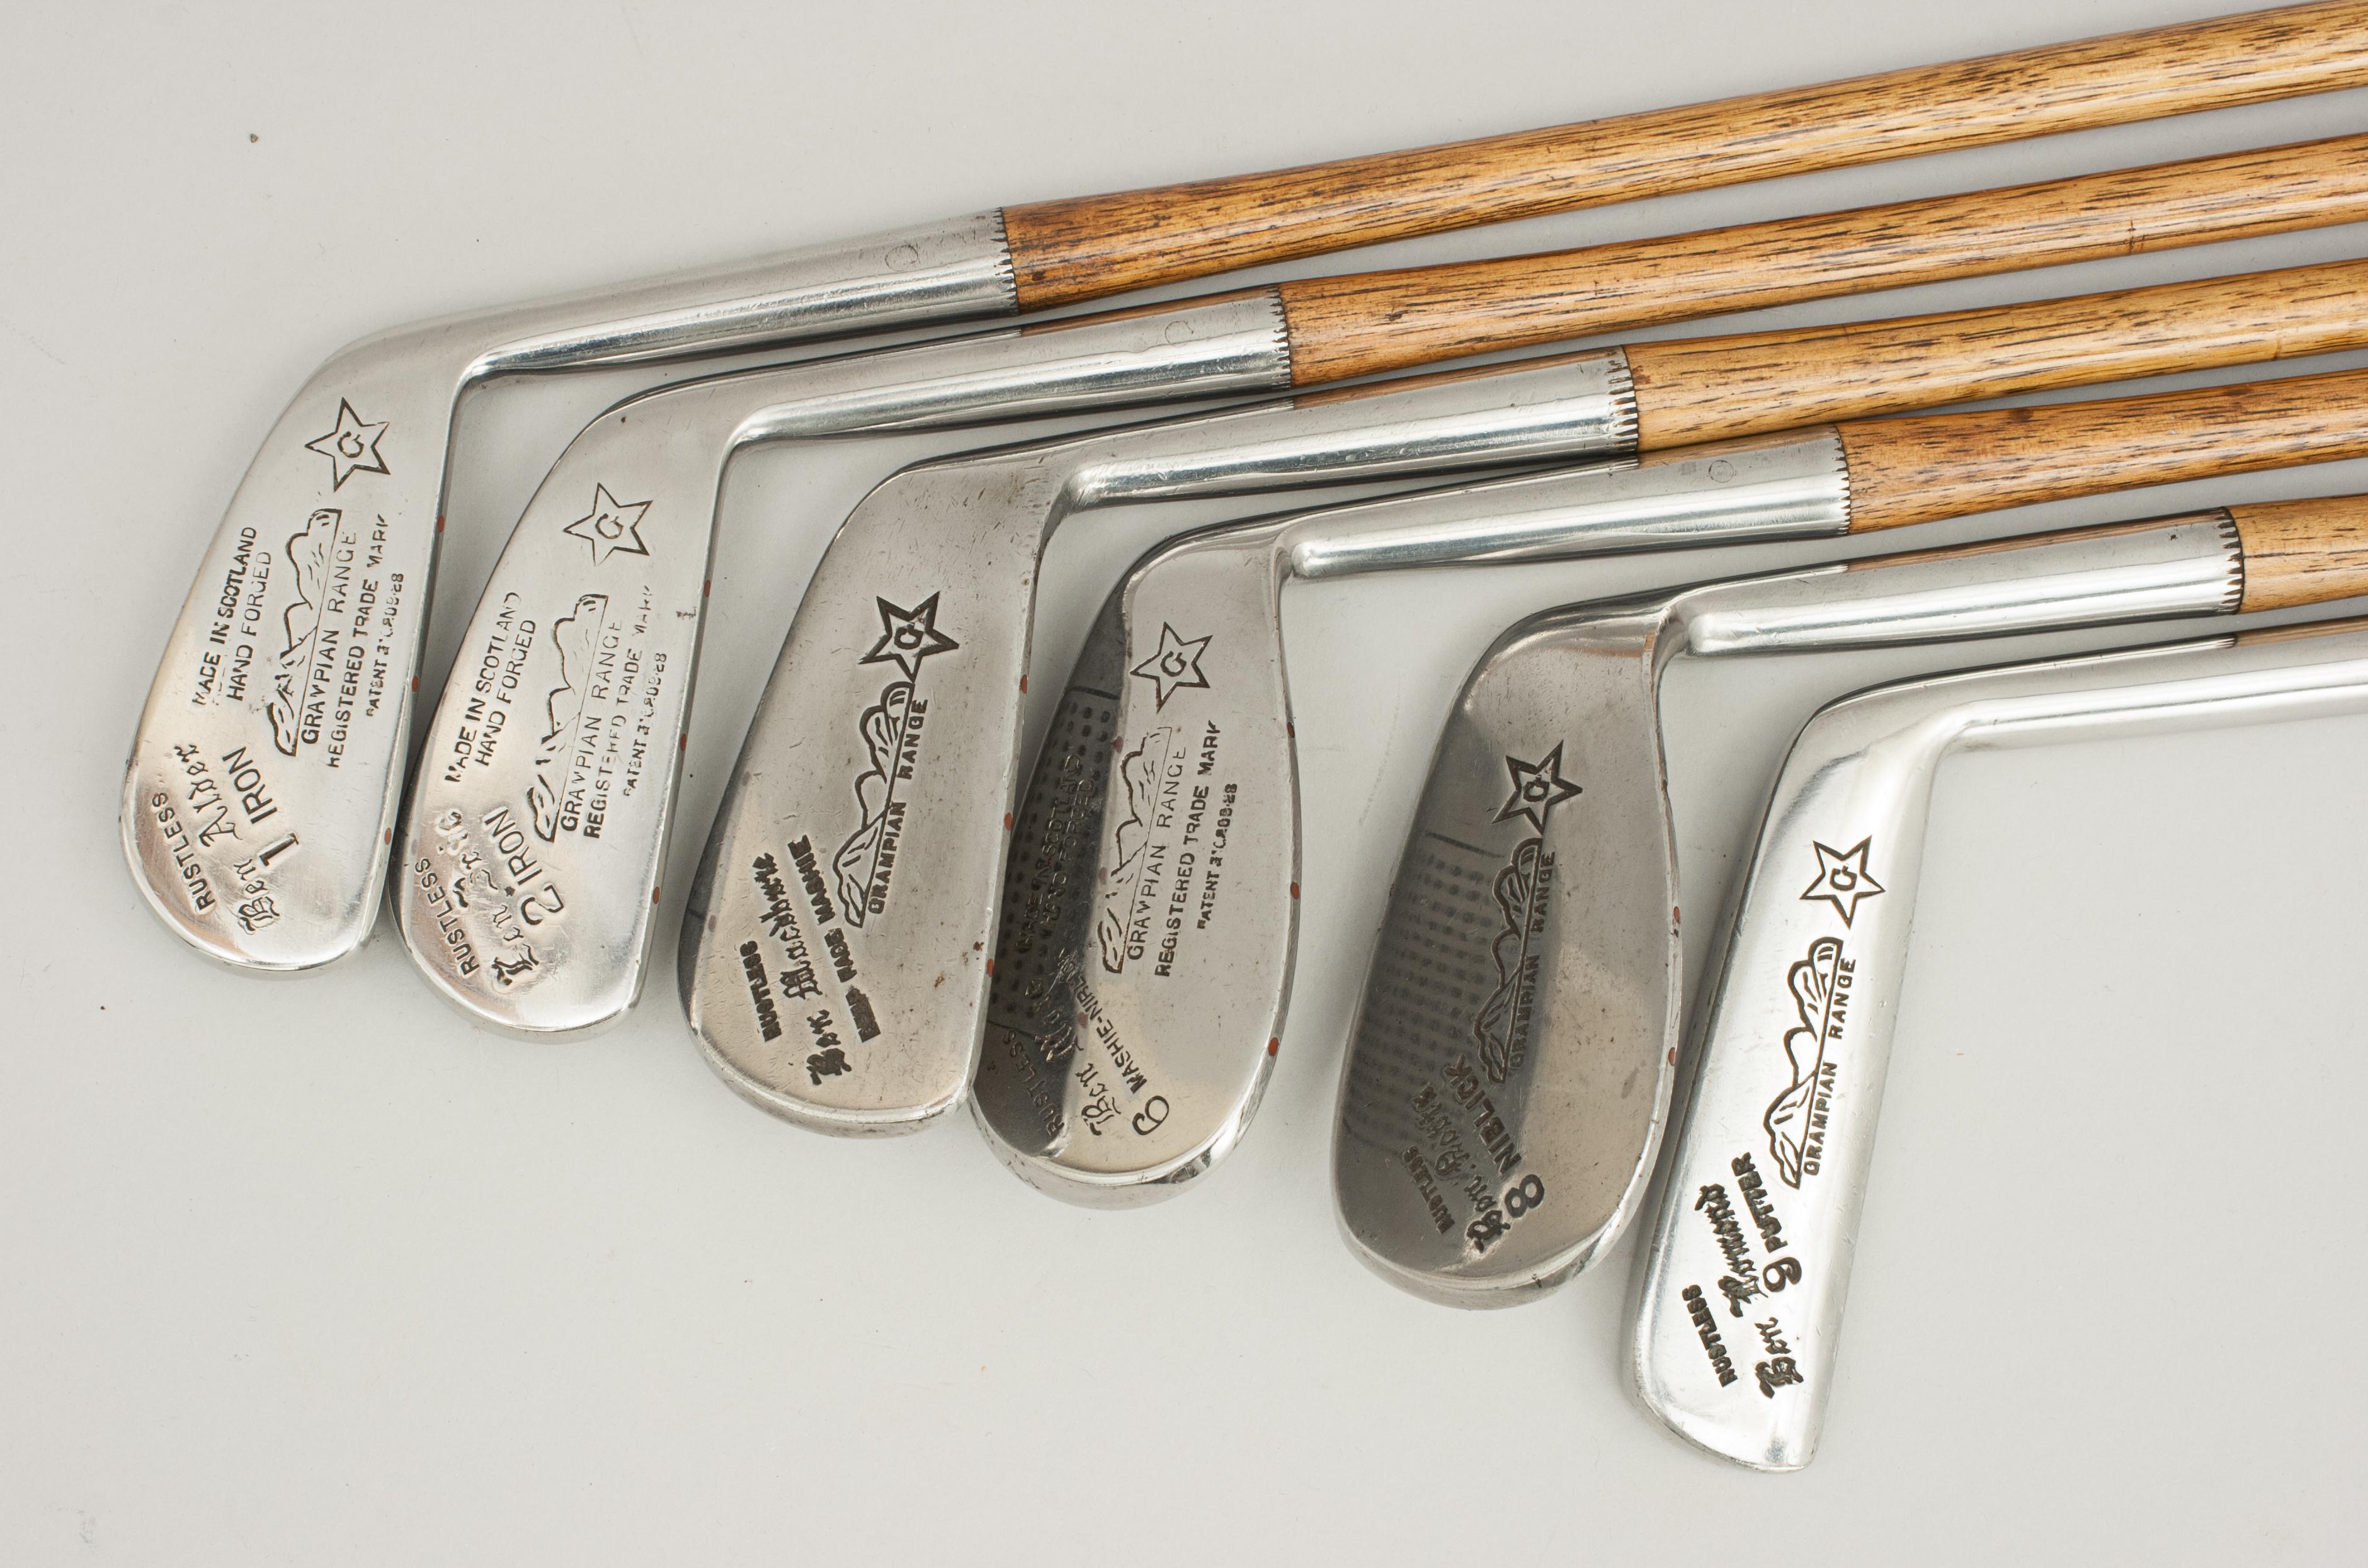 English Set of Hickory Golf Clubs by Gibson of Kinghorn, Fife, Scotland